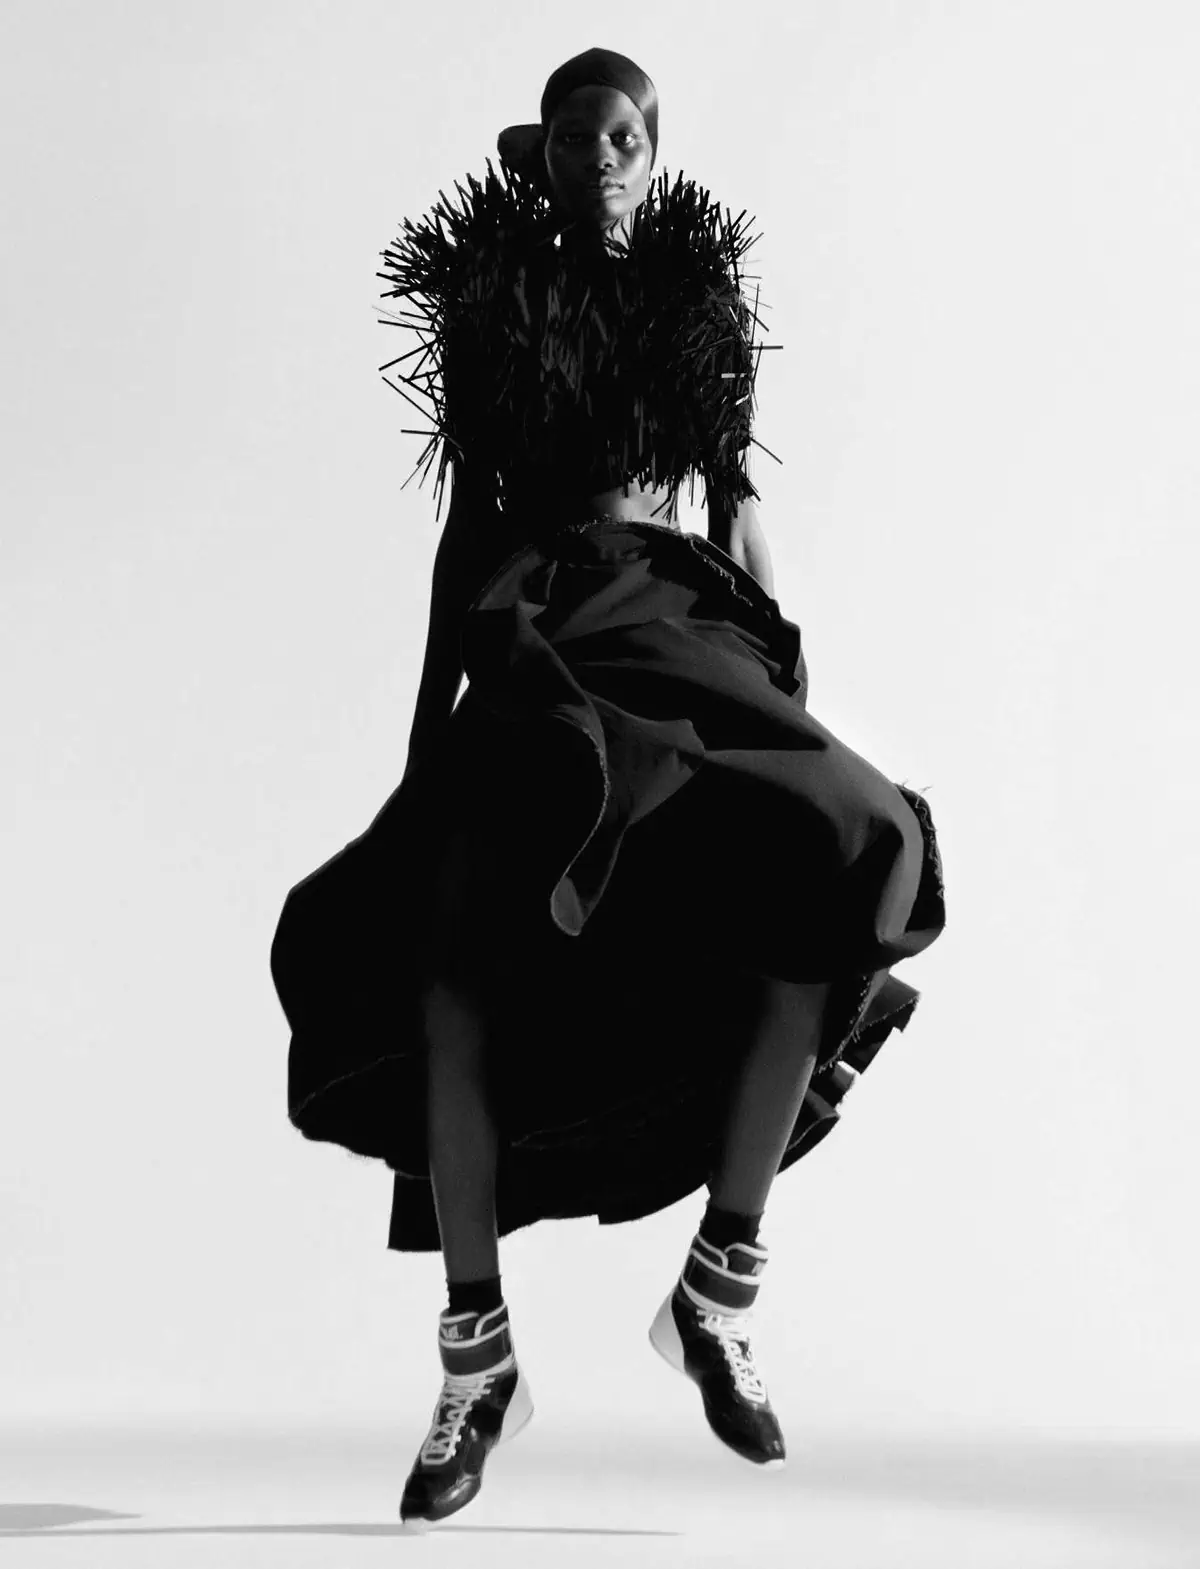 Athieng Bul by Rory van Millingen for Numéro March 2023 - fashionotography